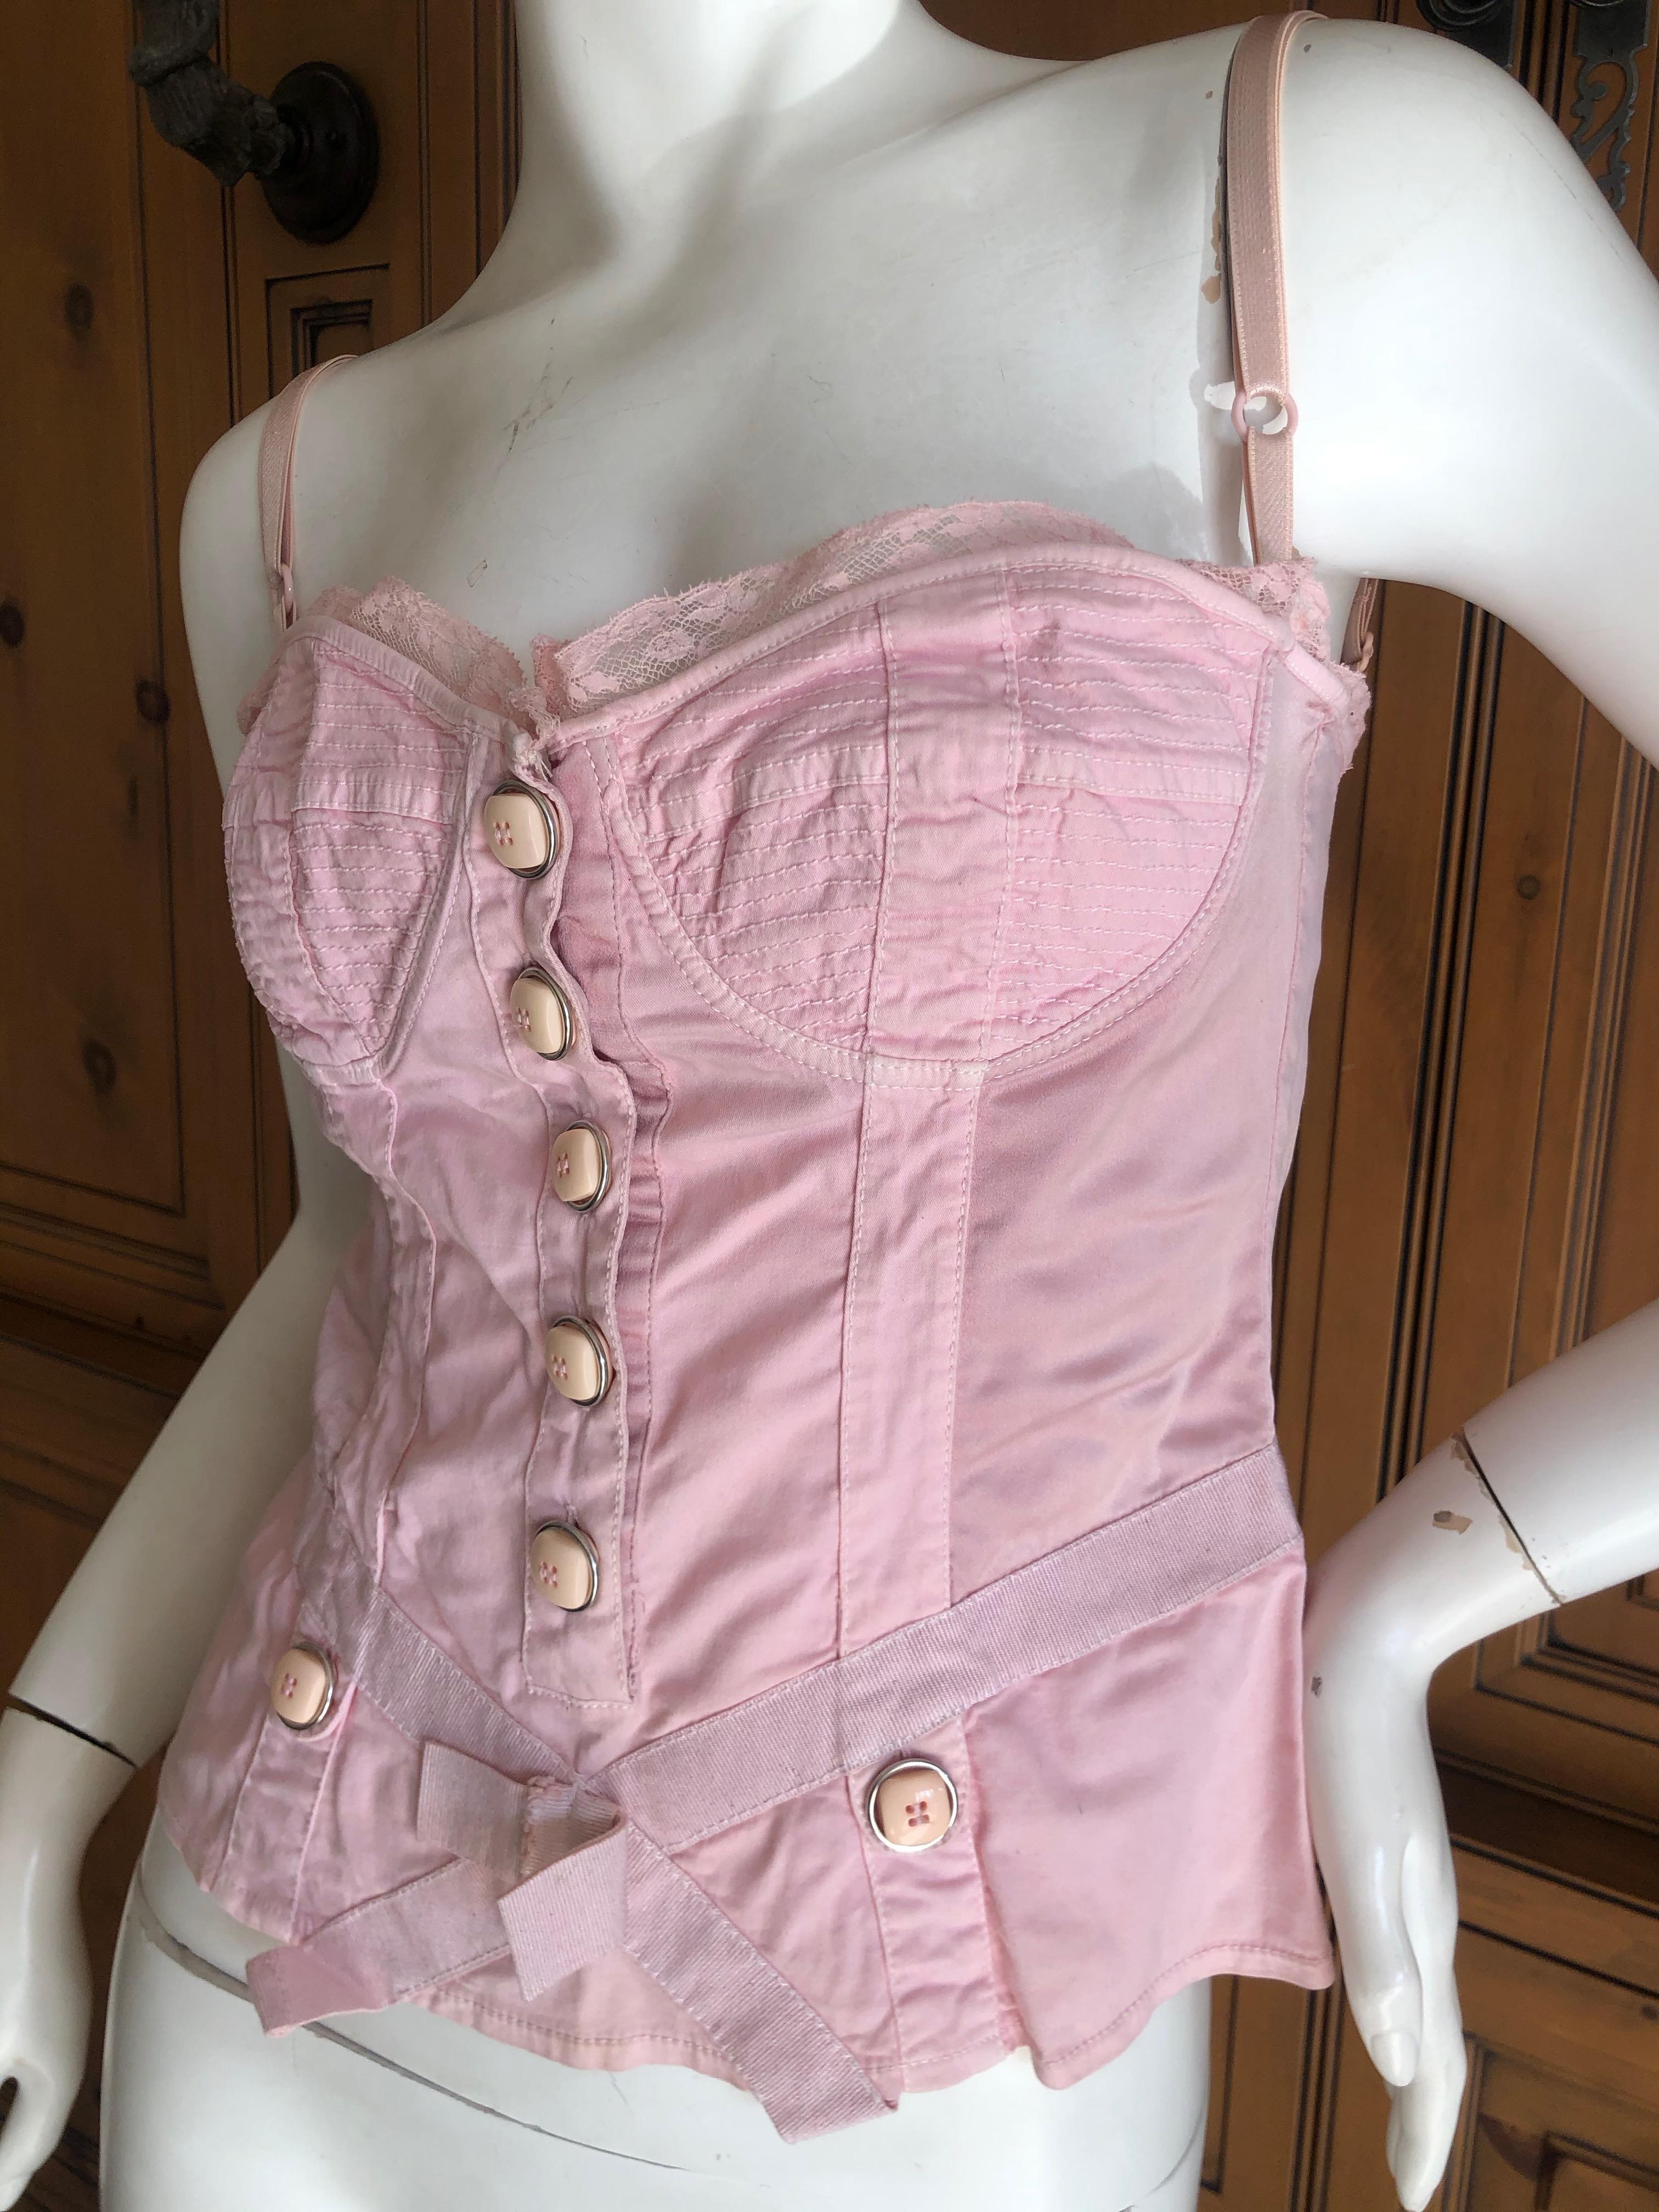 D&G Dolce & Gabbana Vintage Pink Corset with Large Buttons.
Marked size 42, lots of stretch
Bust 34'
Waist 26